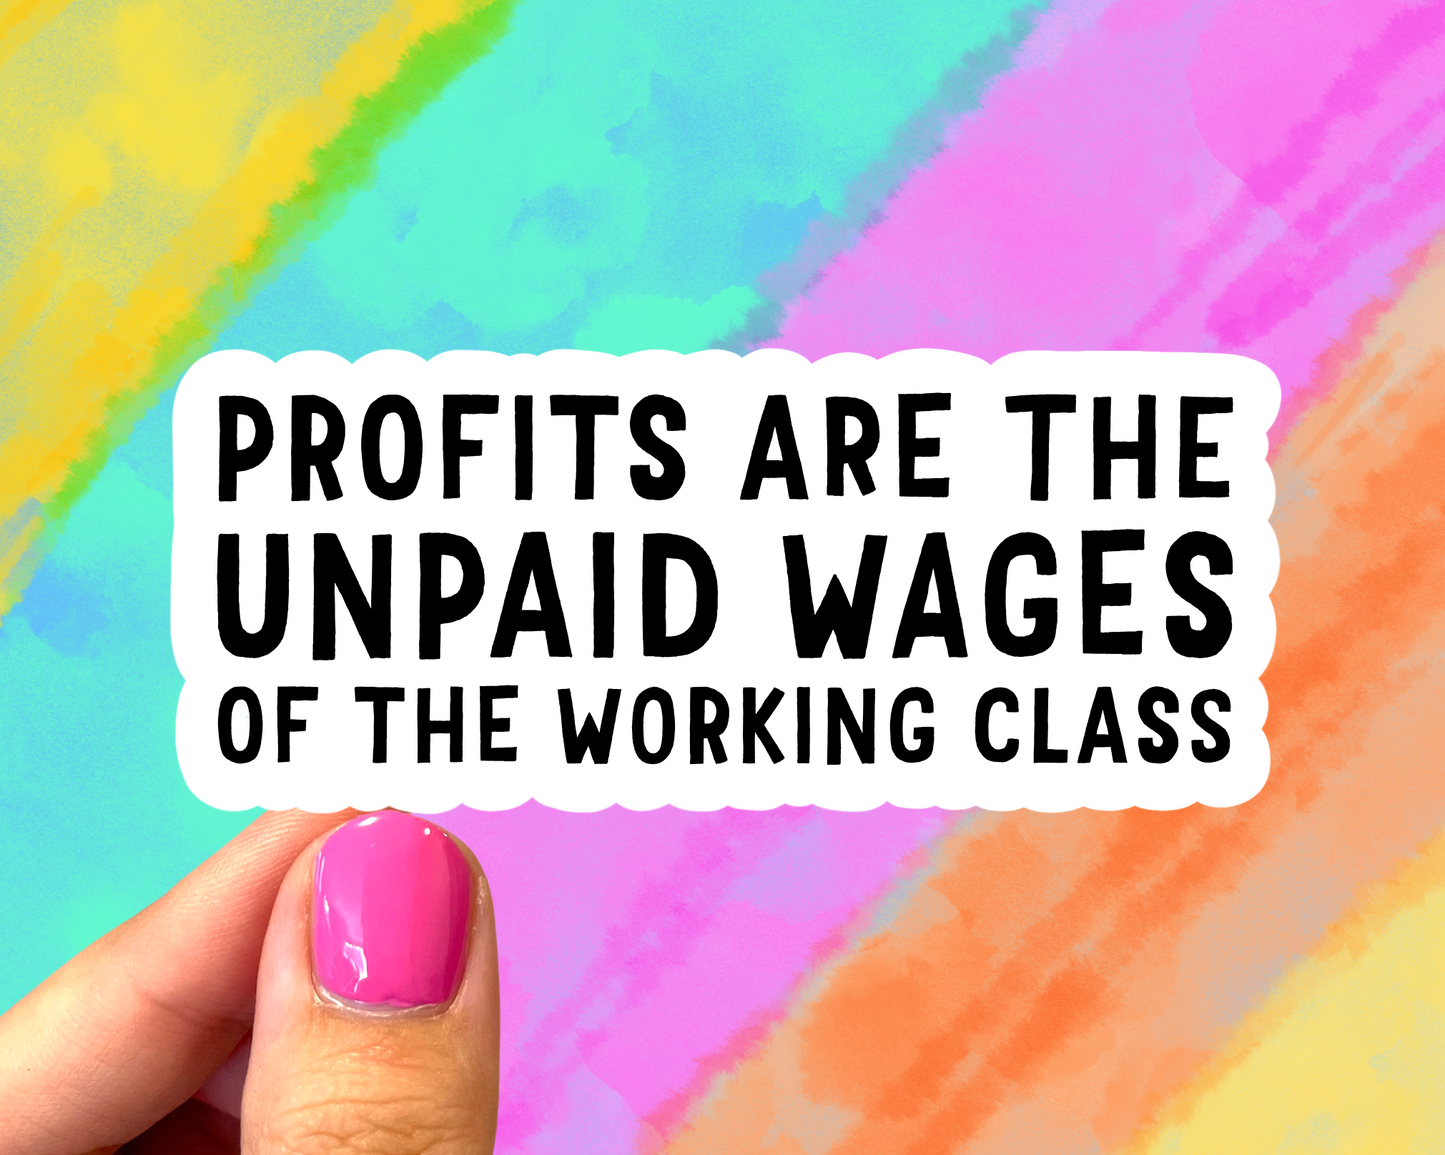 Profits are the unpaid wages of the working class